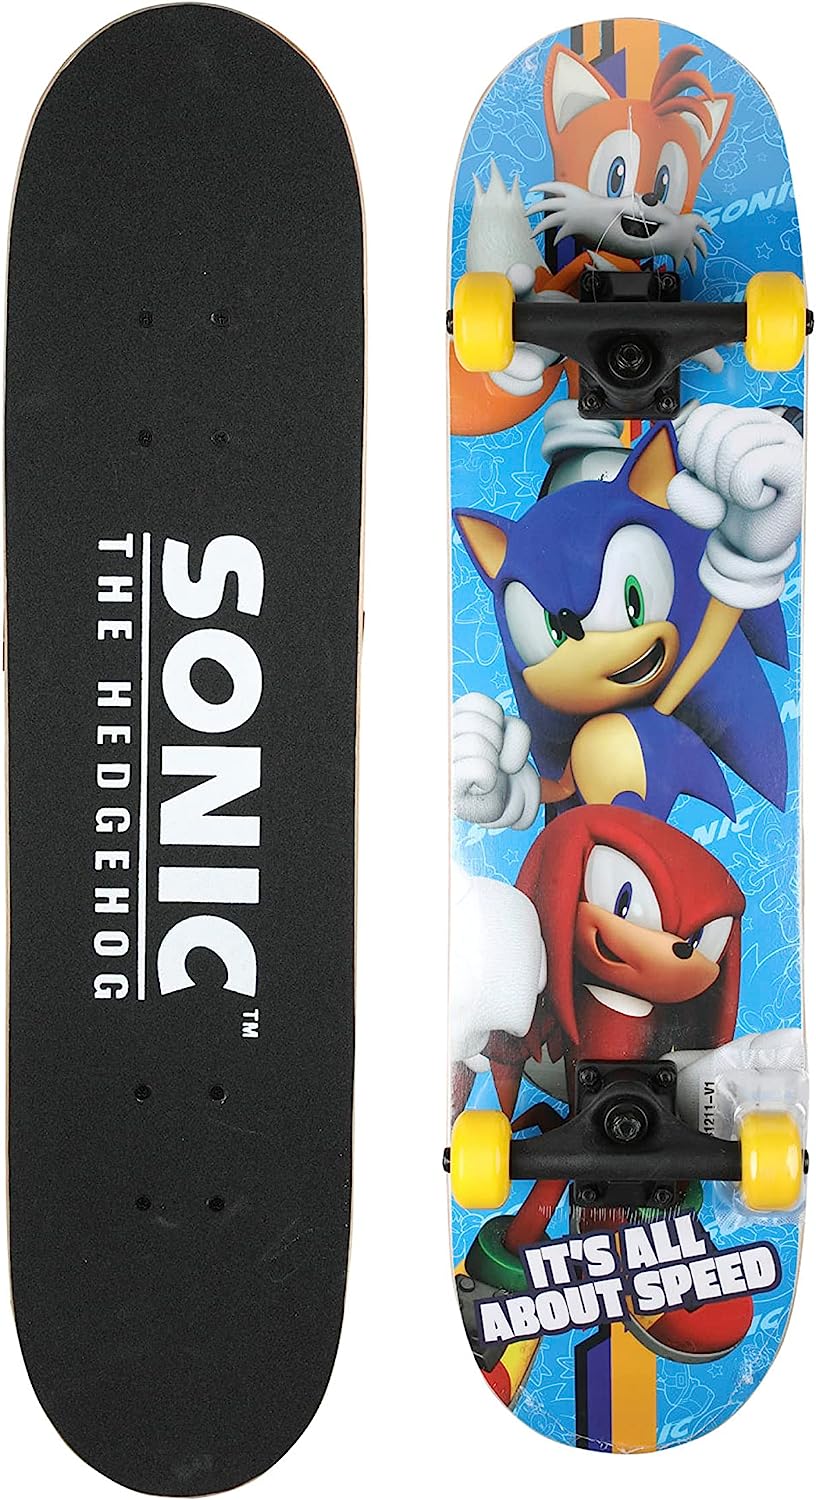 Does Sonic use a skateboard